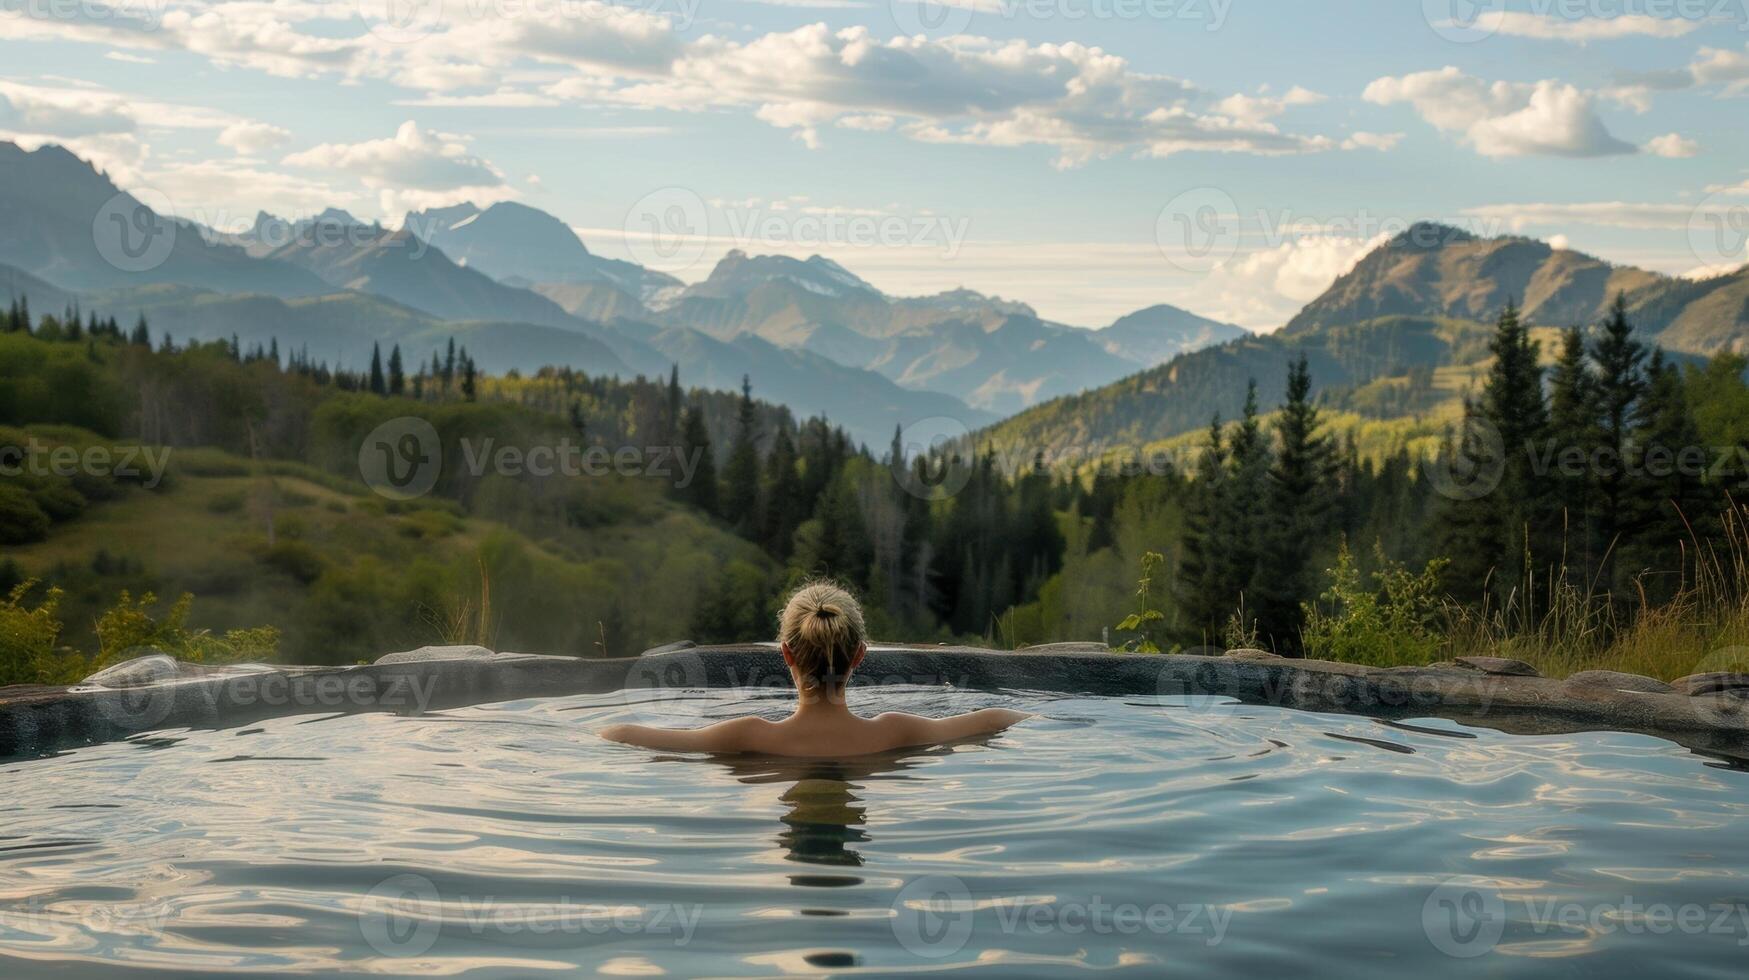 A person relaxes in a natural hot tub surrounded by peaceful mountains taking a break from the bustle of daily life at a tailored wellness retreat that prioritizes rest and rejuvenation photo